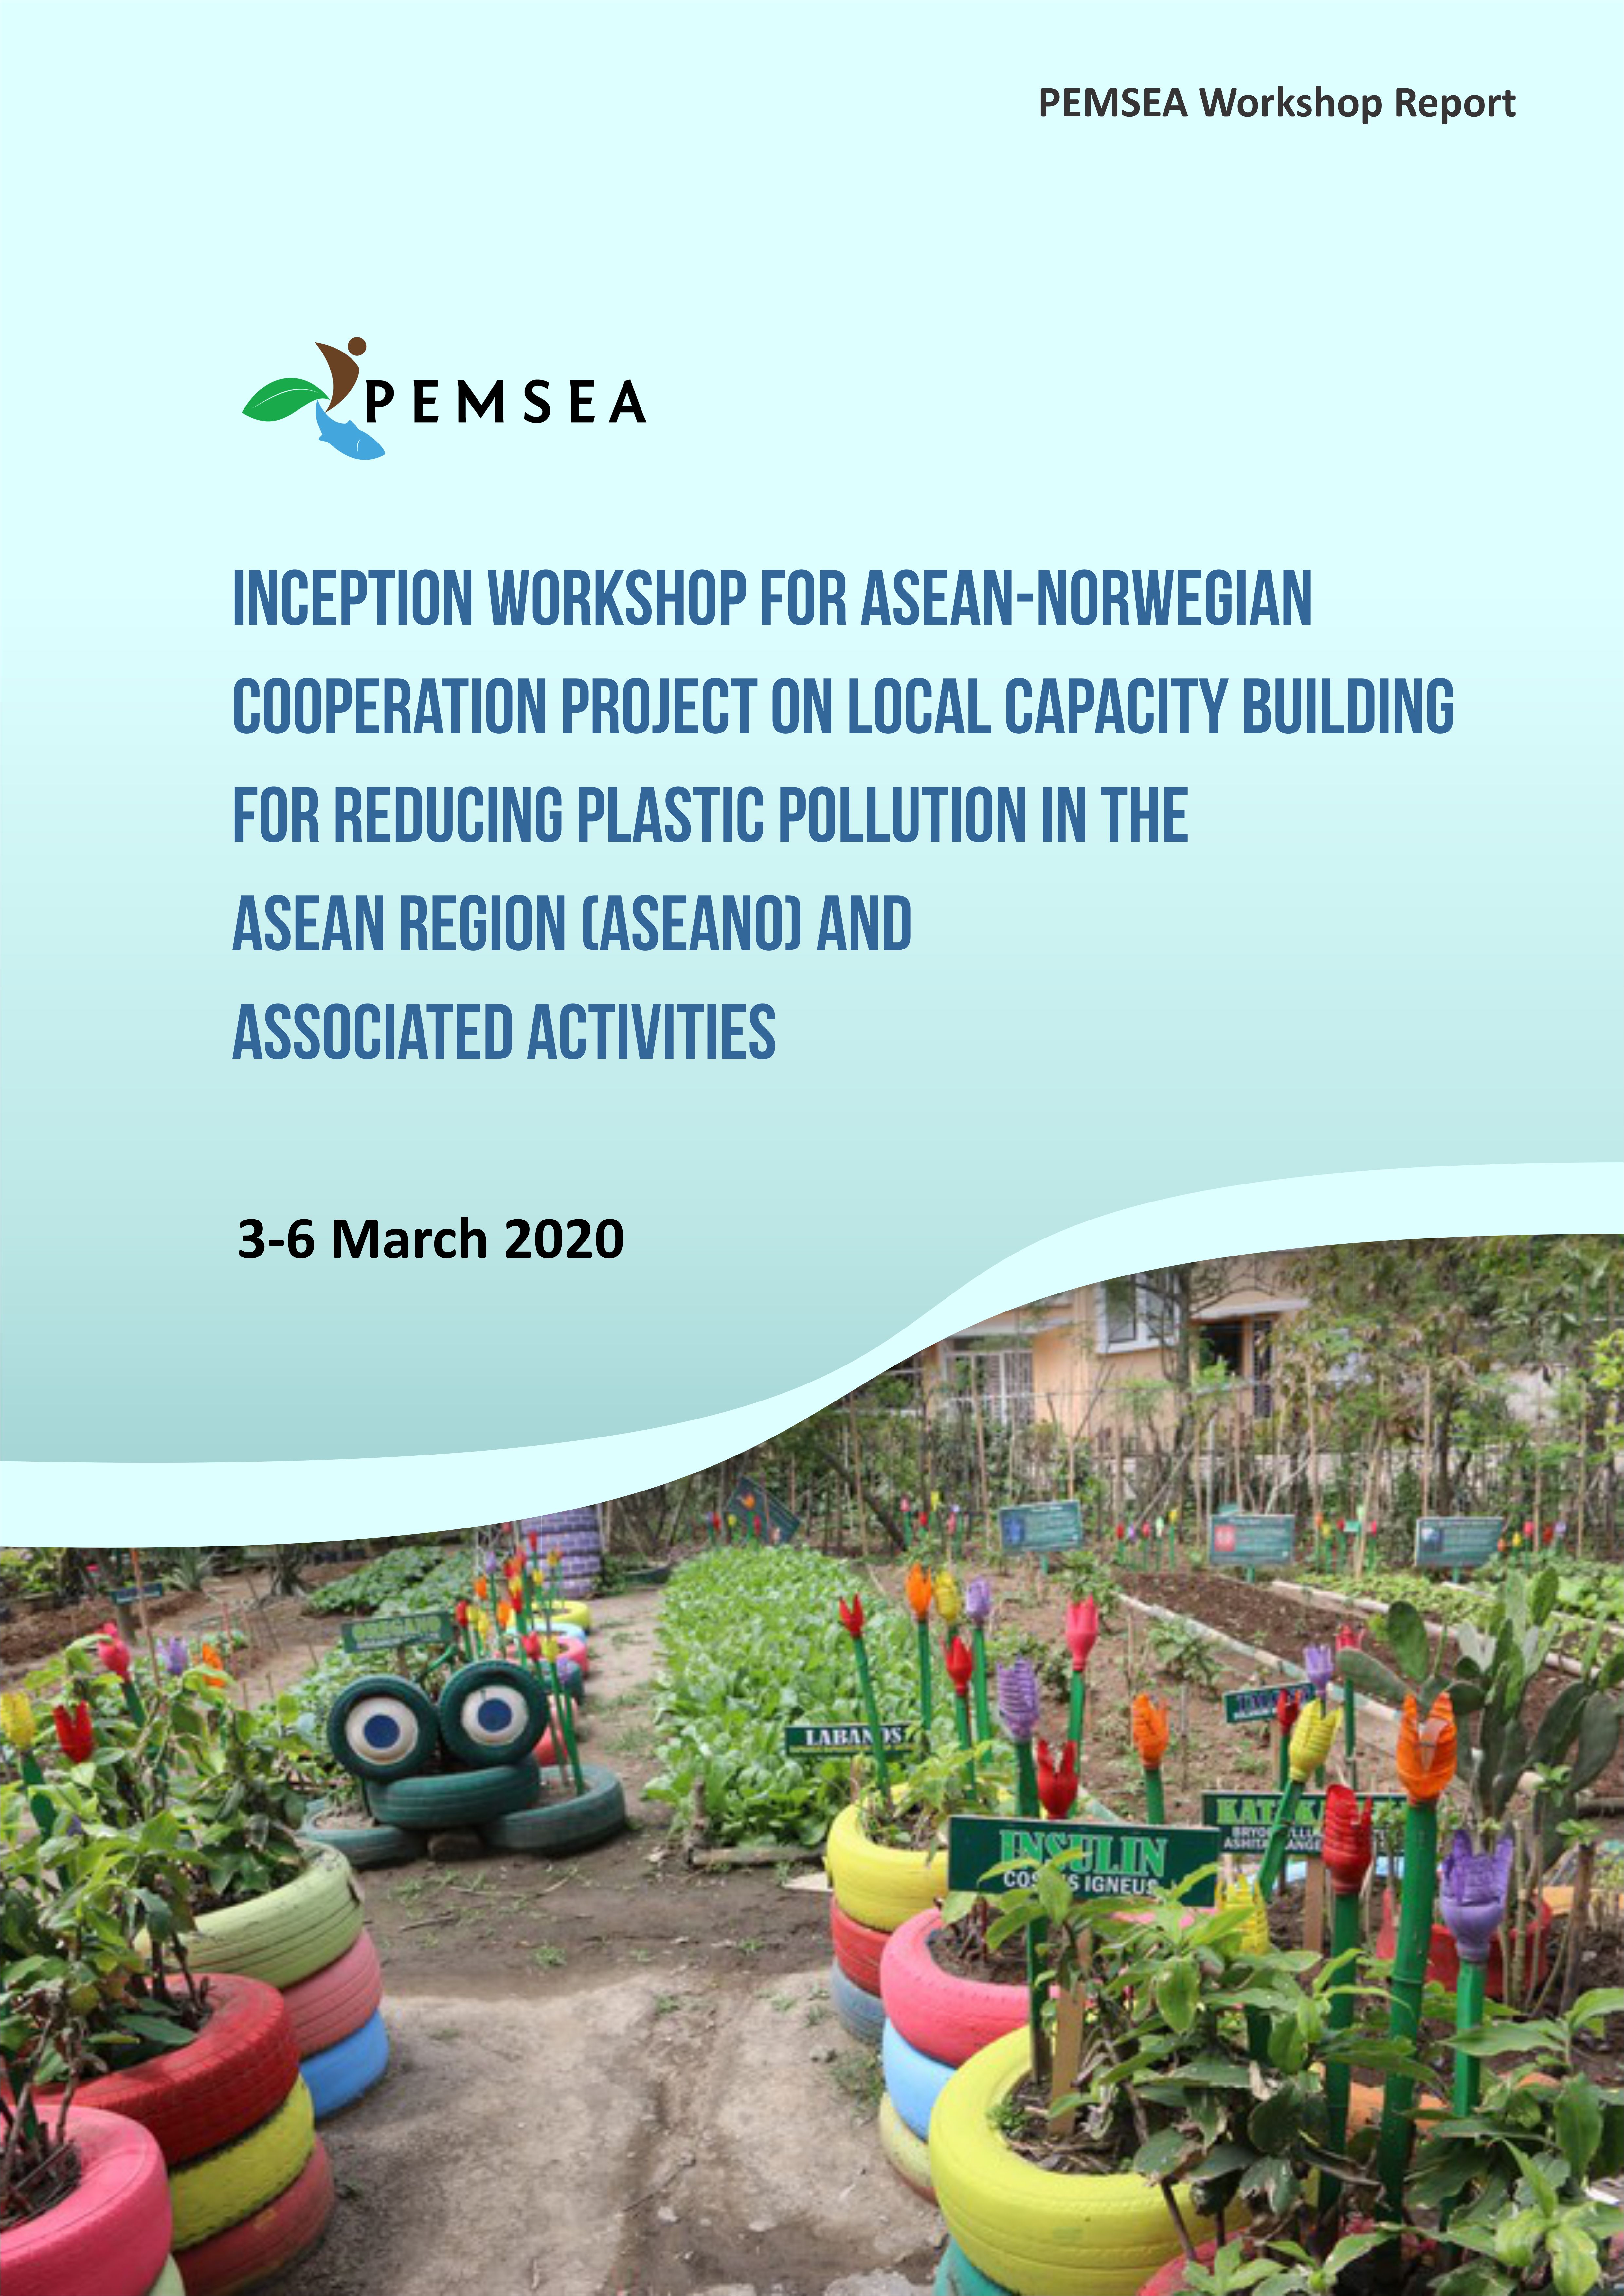 Inception workshop for ASEAN-Norwegian cooperation project on local capacity building for reducing plastic pollution in the ASEAN region (ASEANO) and associated activities